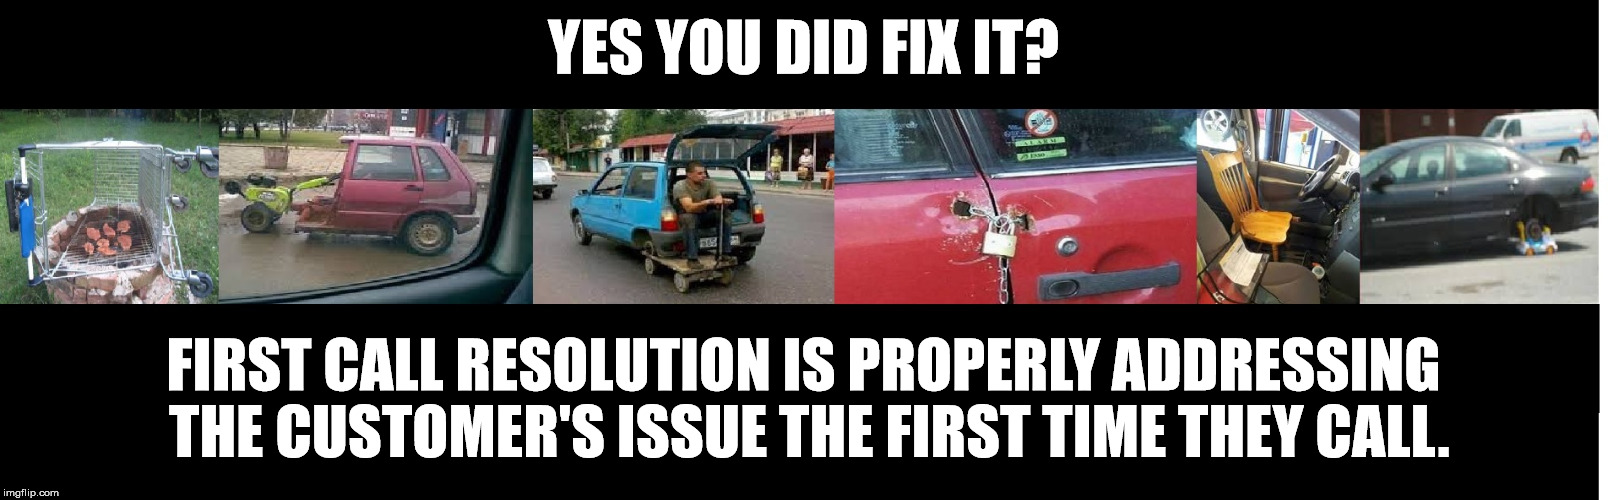 I fixed it | YES YOU DID FIX IT? FIRST CALL RESOLUTION IS PROPERLY ADDRESSING THE CUSTOMER'S ISSUE THE FIRST TIME THEY CALL. | image tagged in first call resolution,there i fixed it,doing it right,i have no idea what i am doing,bufoonery,imbecilework | made w/ Imgflip meme maker